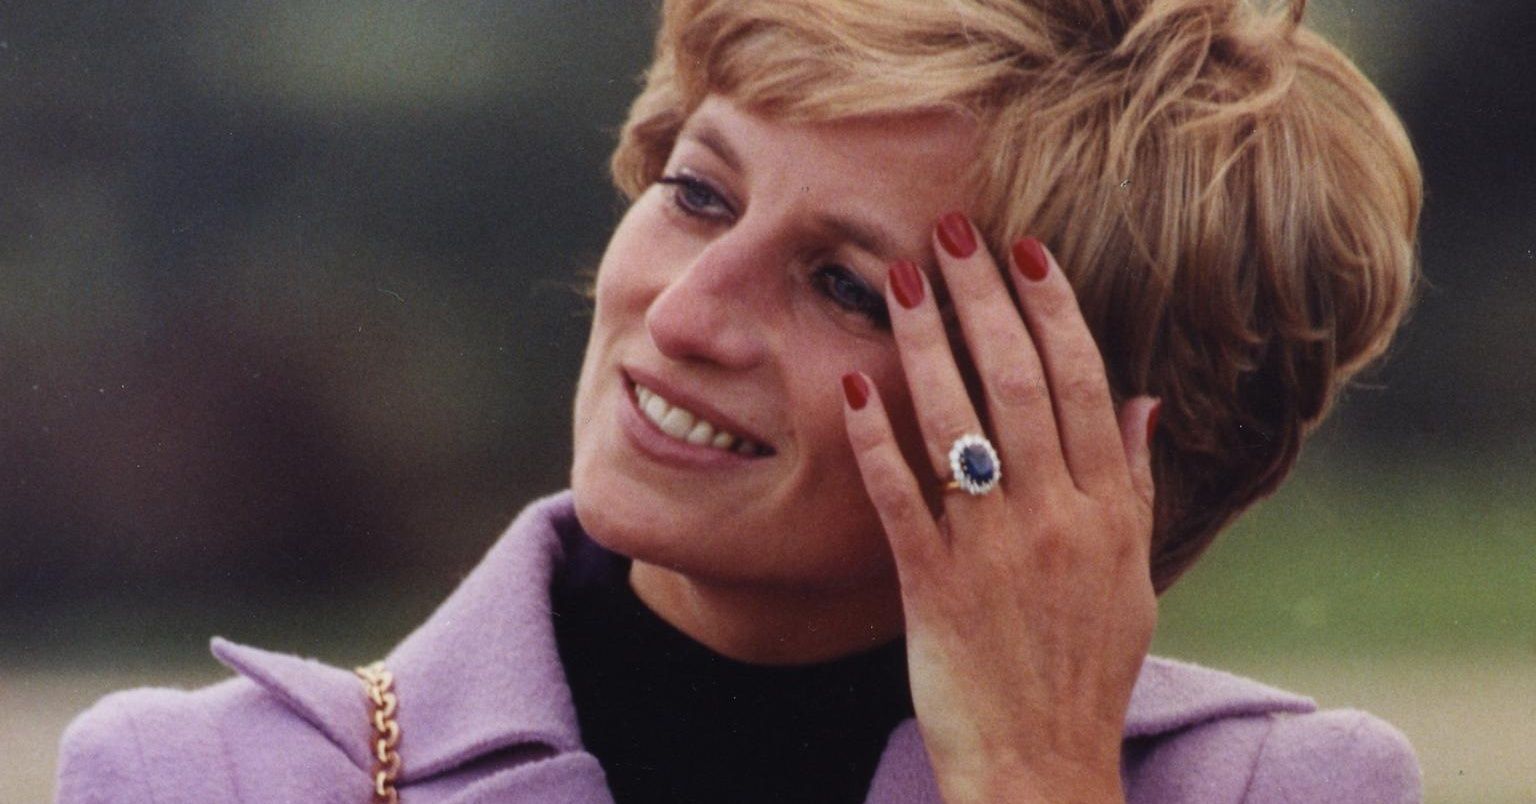 The story behind Princess Diana’s iconic engagement ring, as seen on The Crown